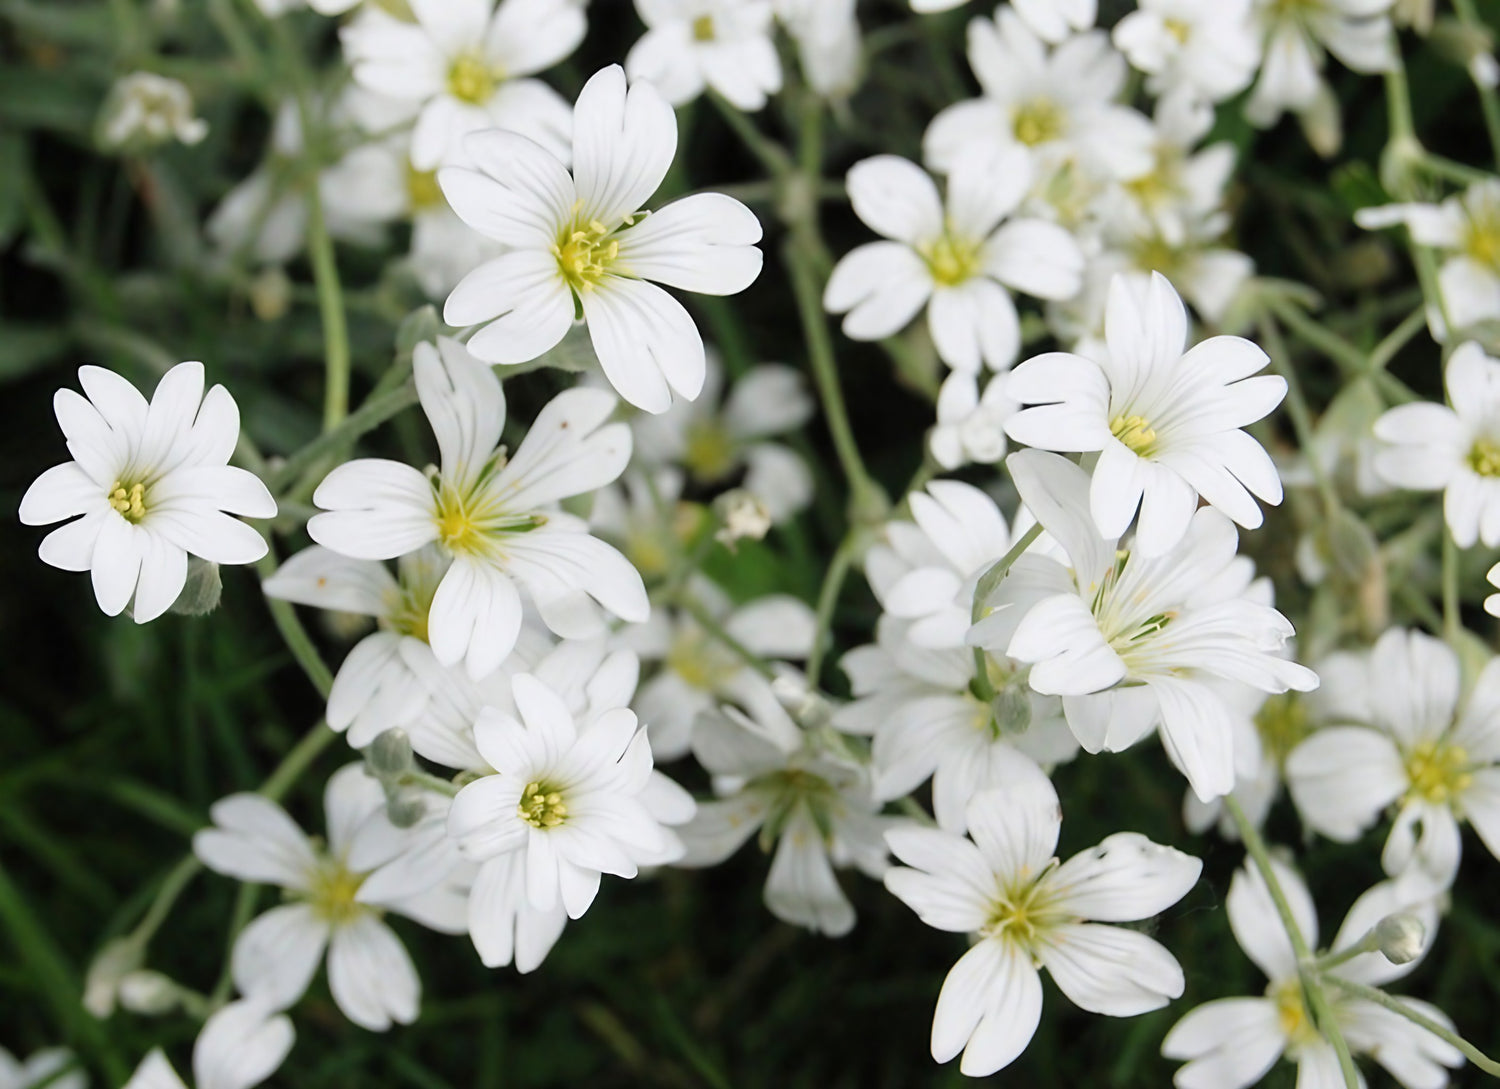 Cluster of Gypsophila Elegans Covent Garden with white blooms and golden centers